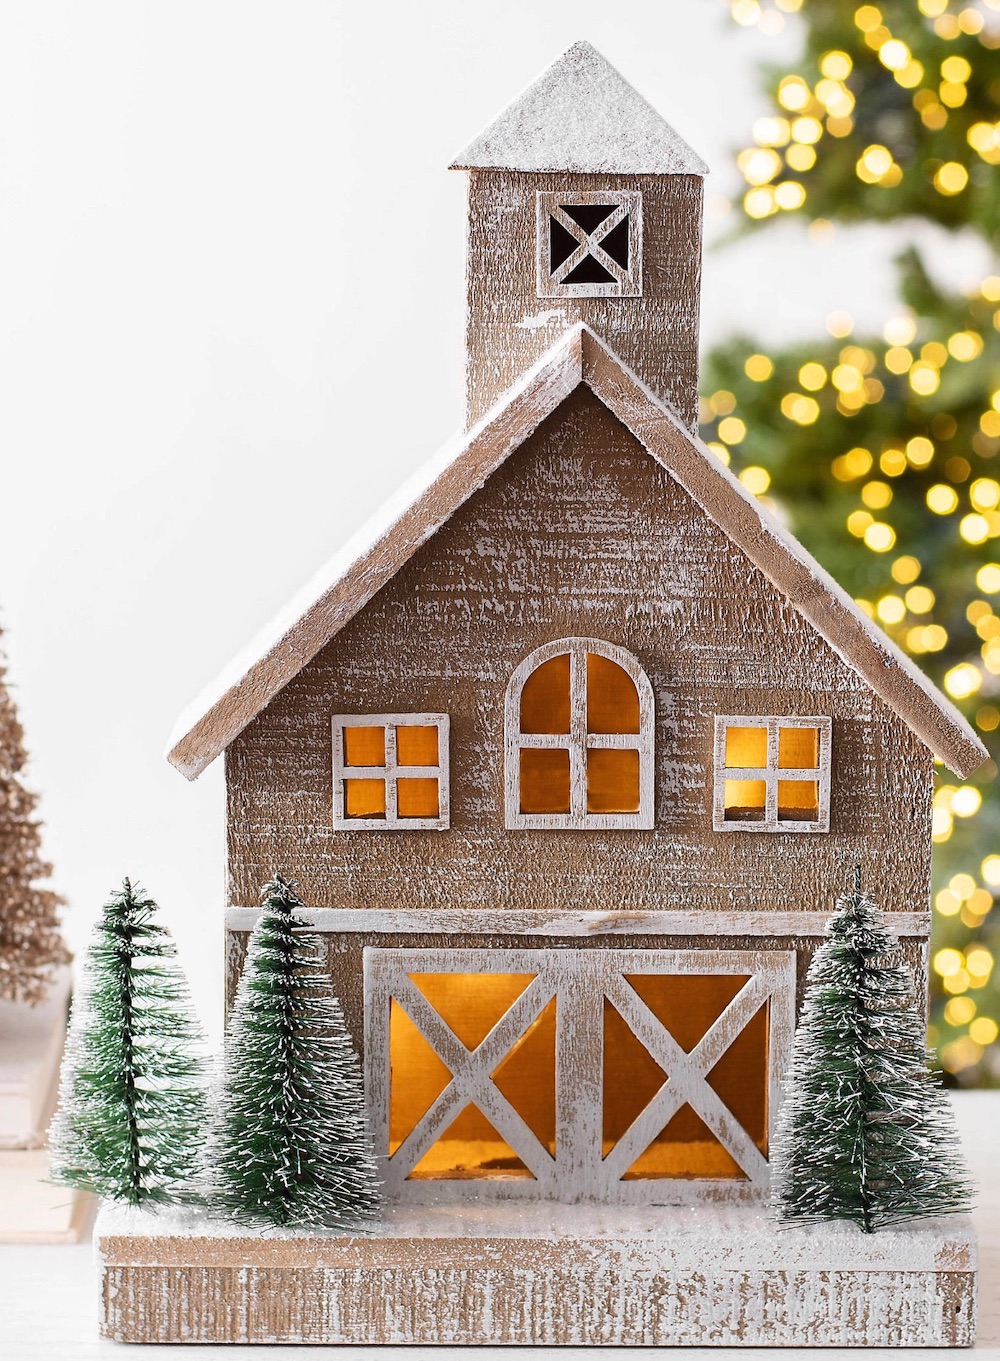 For the Home or Office Pre-Lit LED Wood Barn #Decor #Christmas #ChristmasDecor #HomeDecor #ChristmasHomeDecor #HolidayDecor